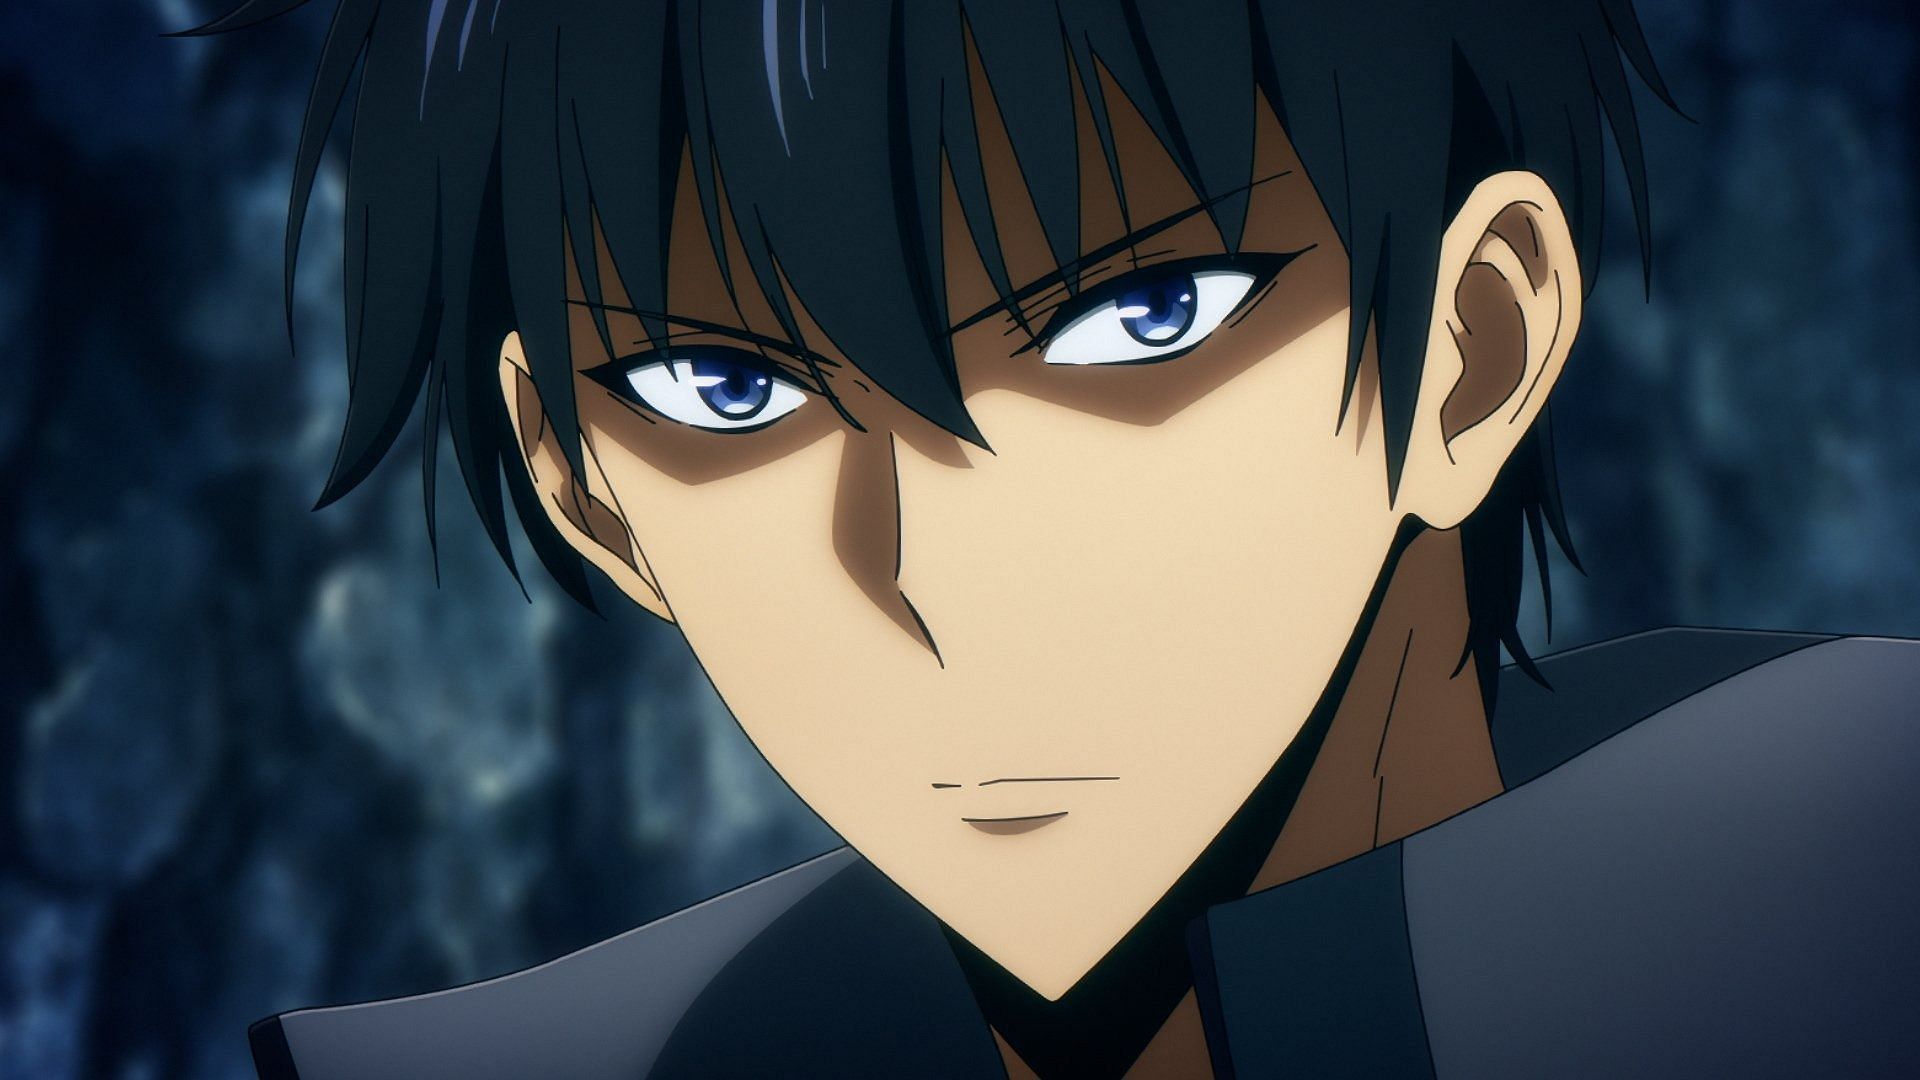 Sung Jin-Woo as seen in the anime (Image via A-1 Pictures)